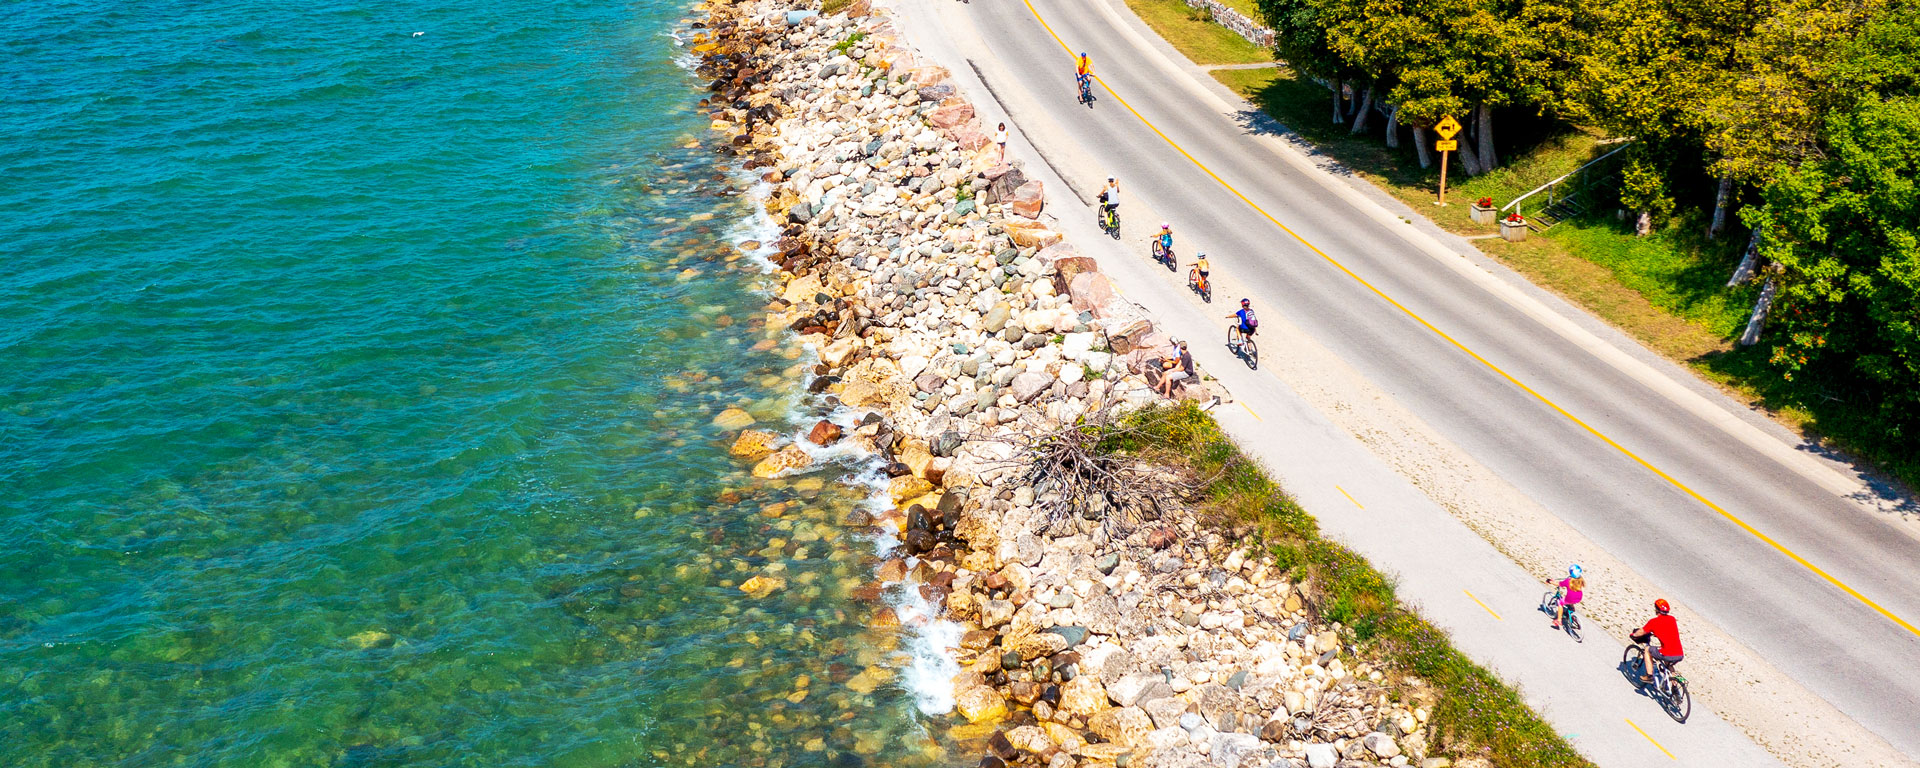 drone shot of a Group of cyclists on a road running next to a vibrant lake